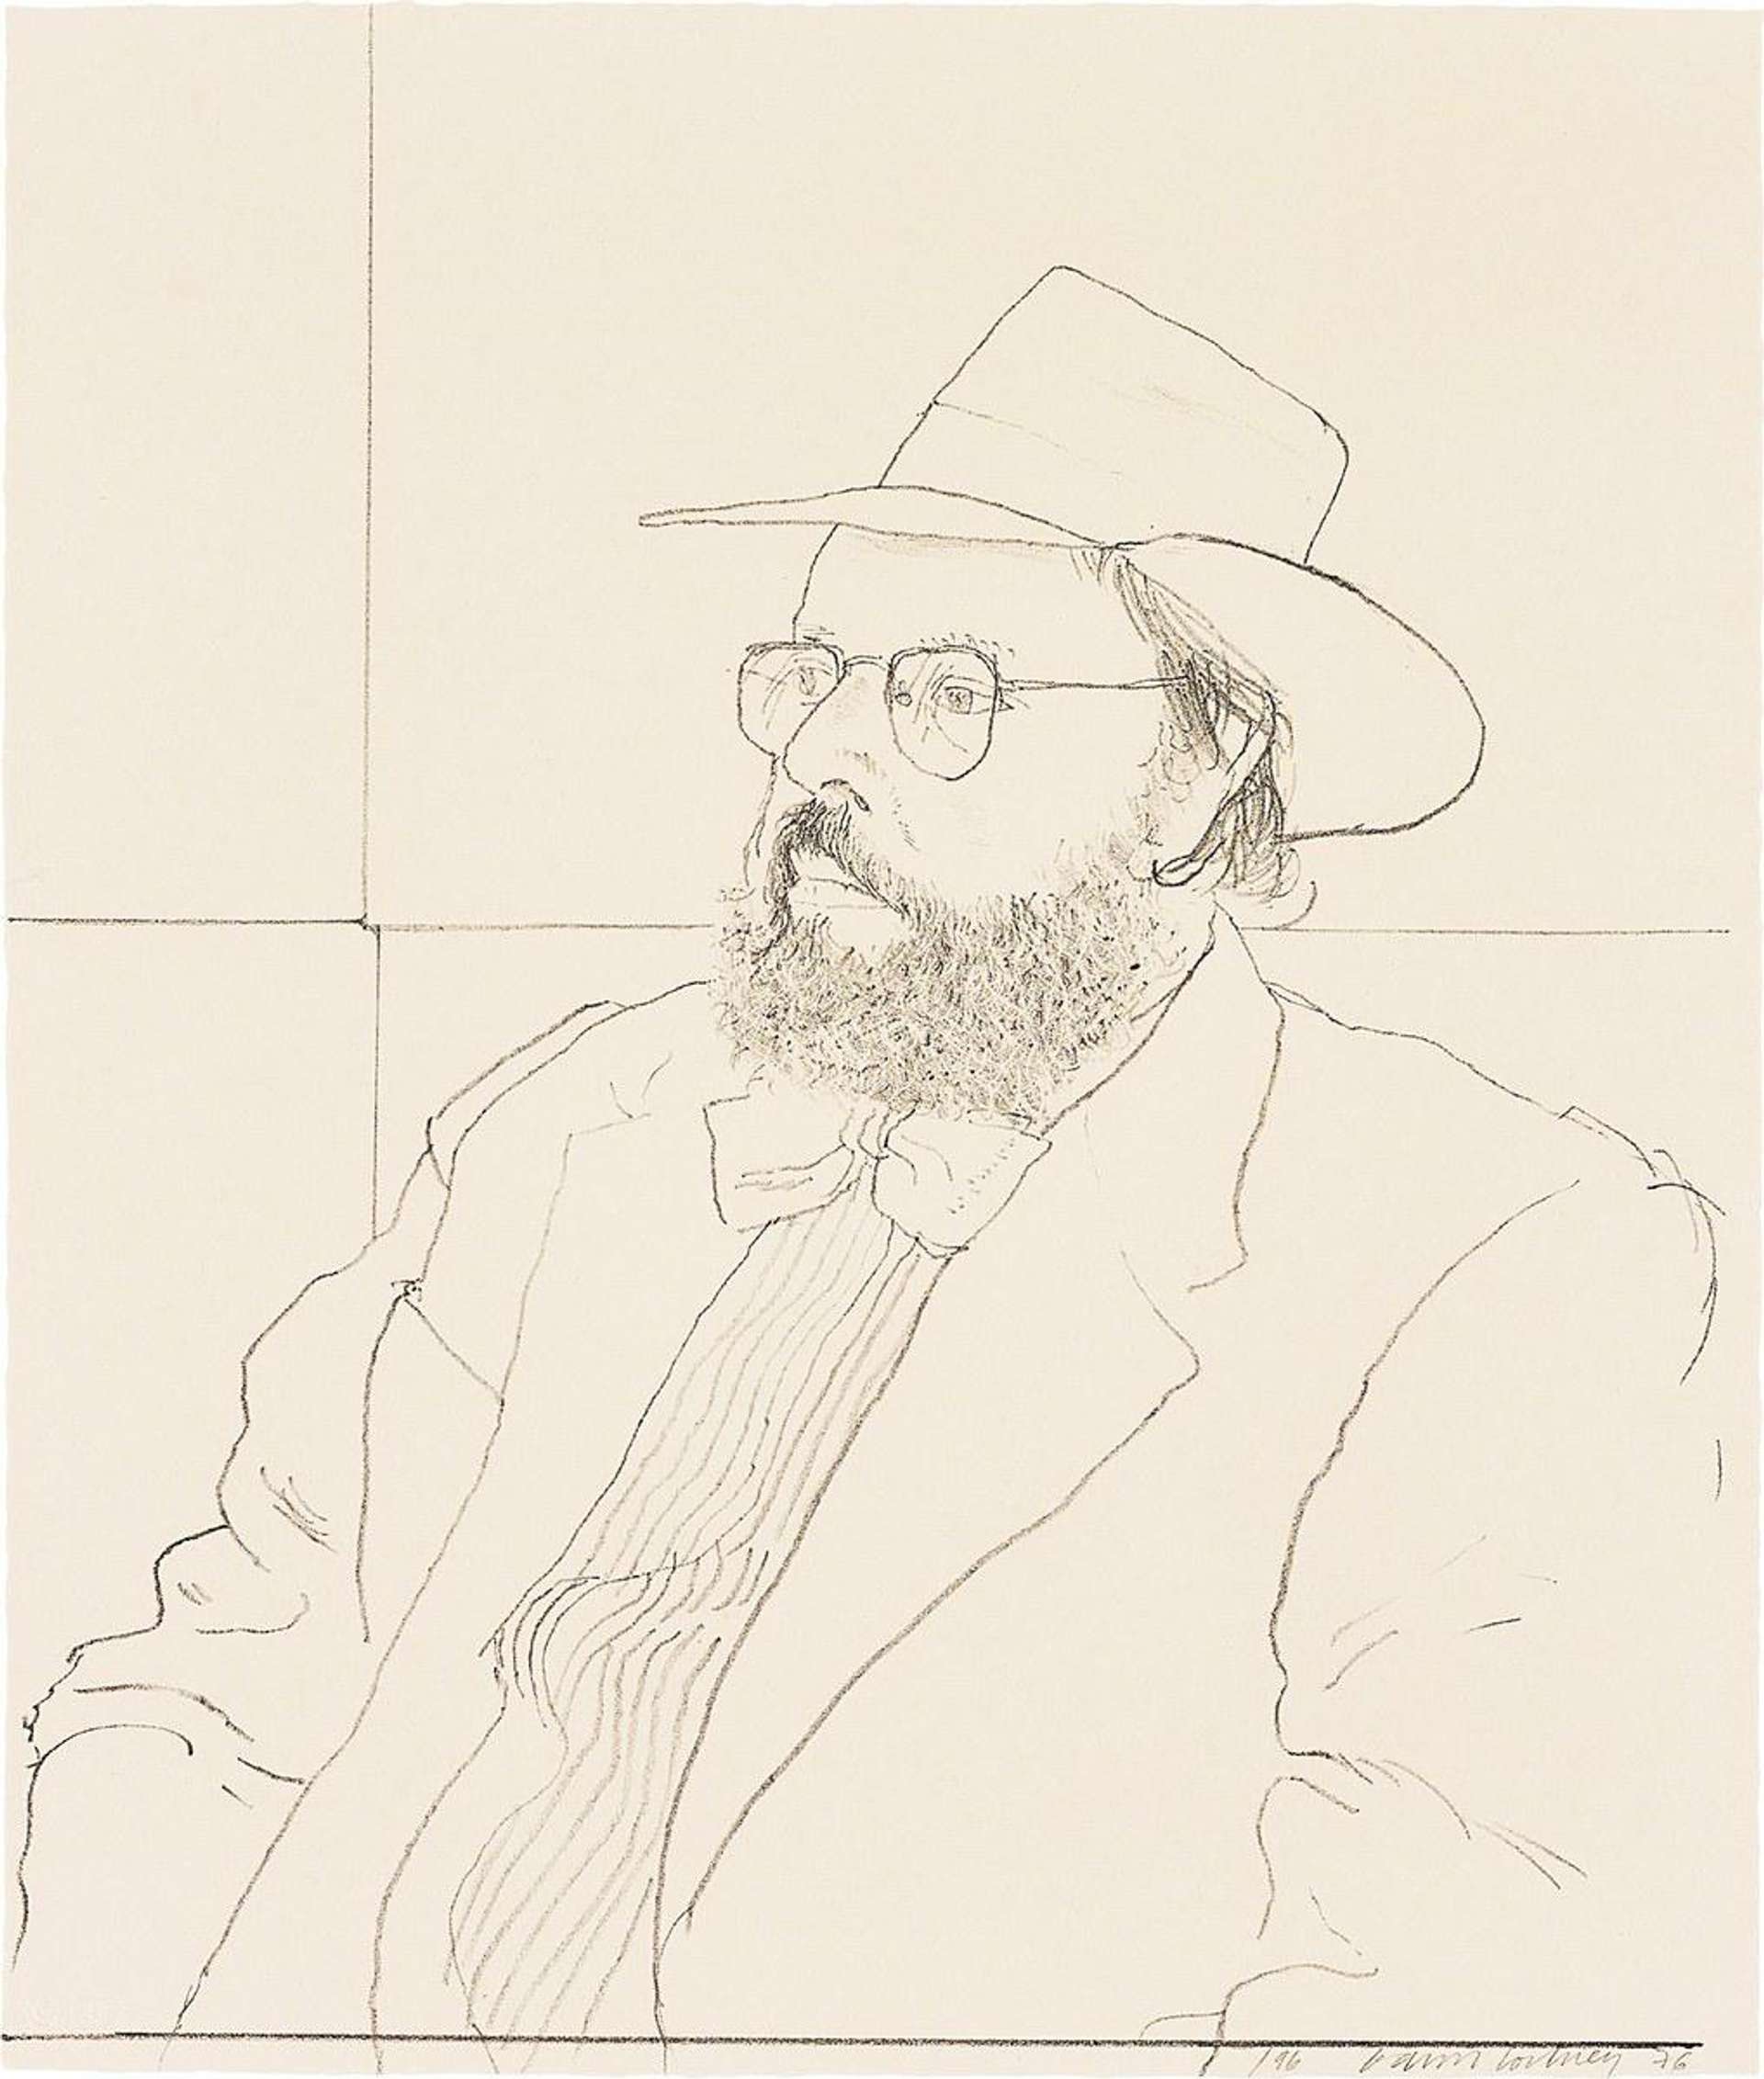 David Hockney’s Henry Geldzahler With Hat. A lithographic print of a drawing of a bearded man wearing glasses, seated, wearing a suit, bow tie and a fedora style hat.